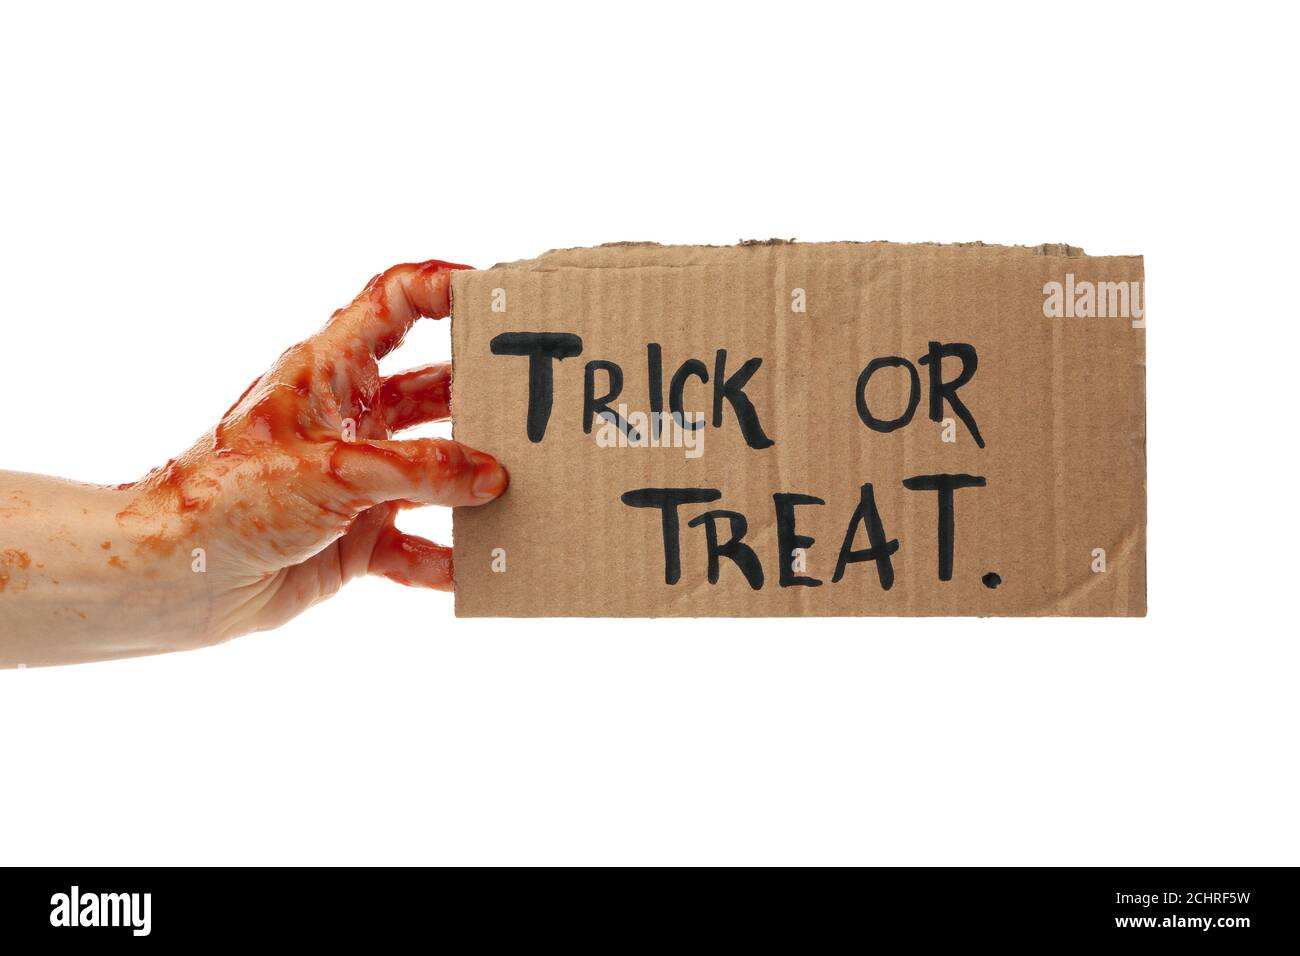 Zombie hand hold carton with text Trick or treat, isolated on white background Stock Photo